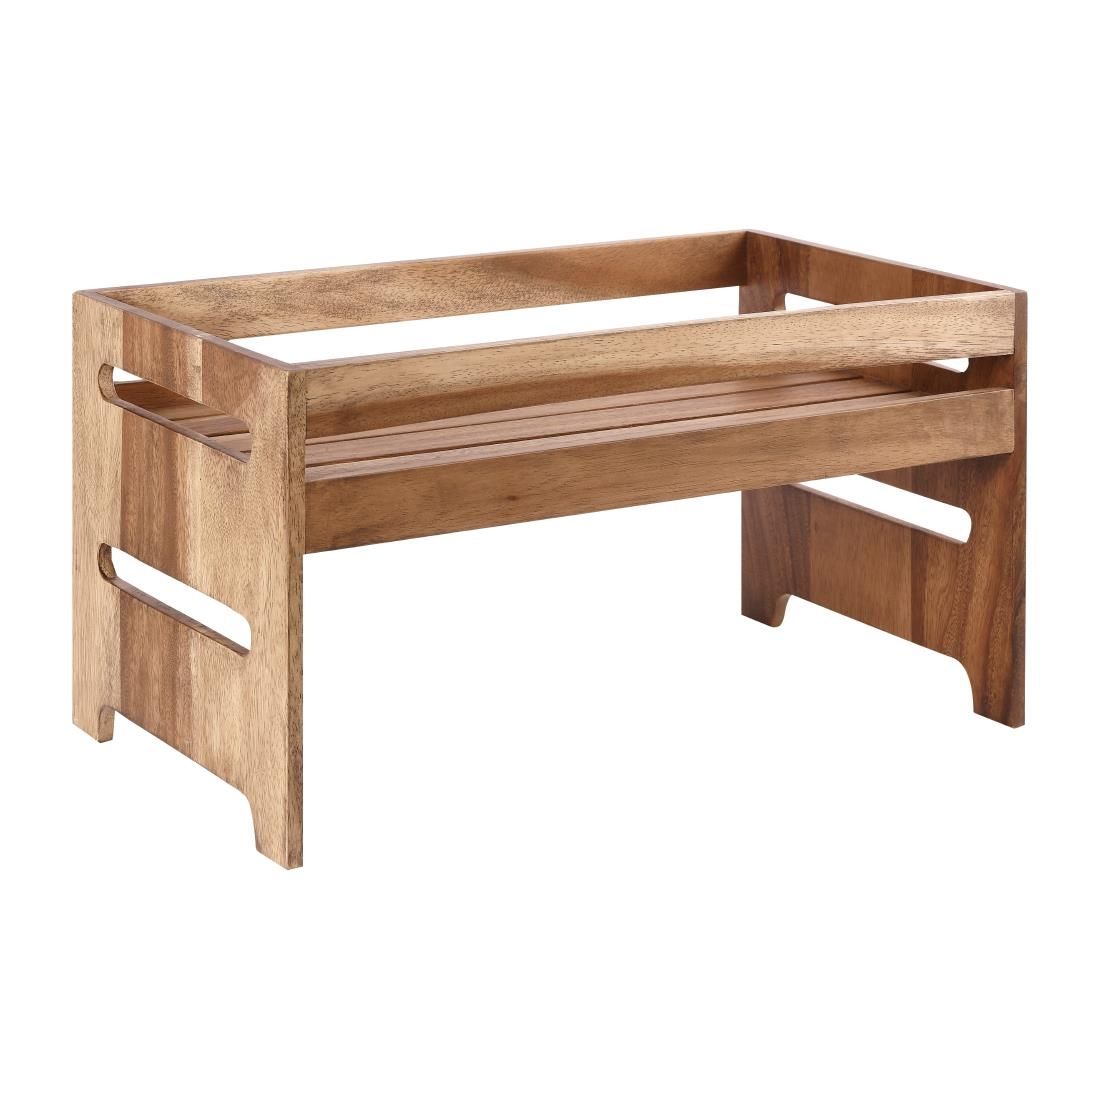 CY742 Churchill Wood Large Rustic Nesting Crate JD Catering Equipment Solutions Ltd